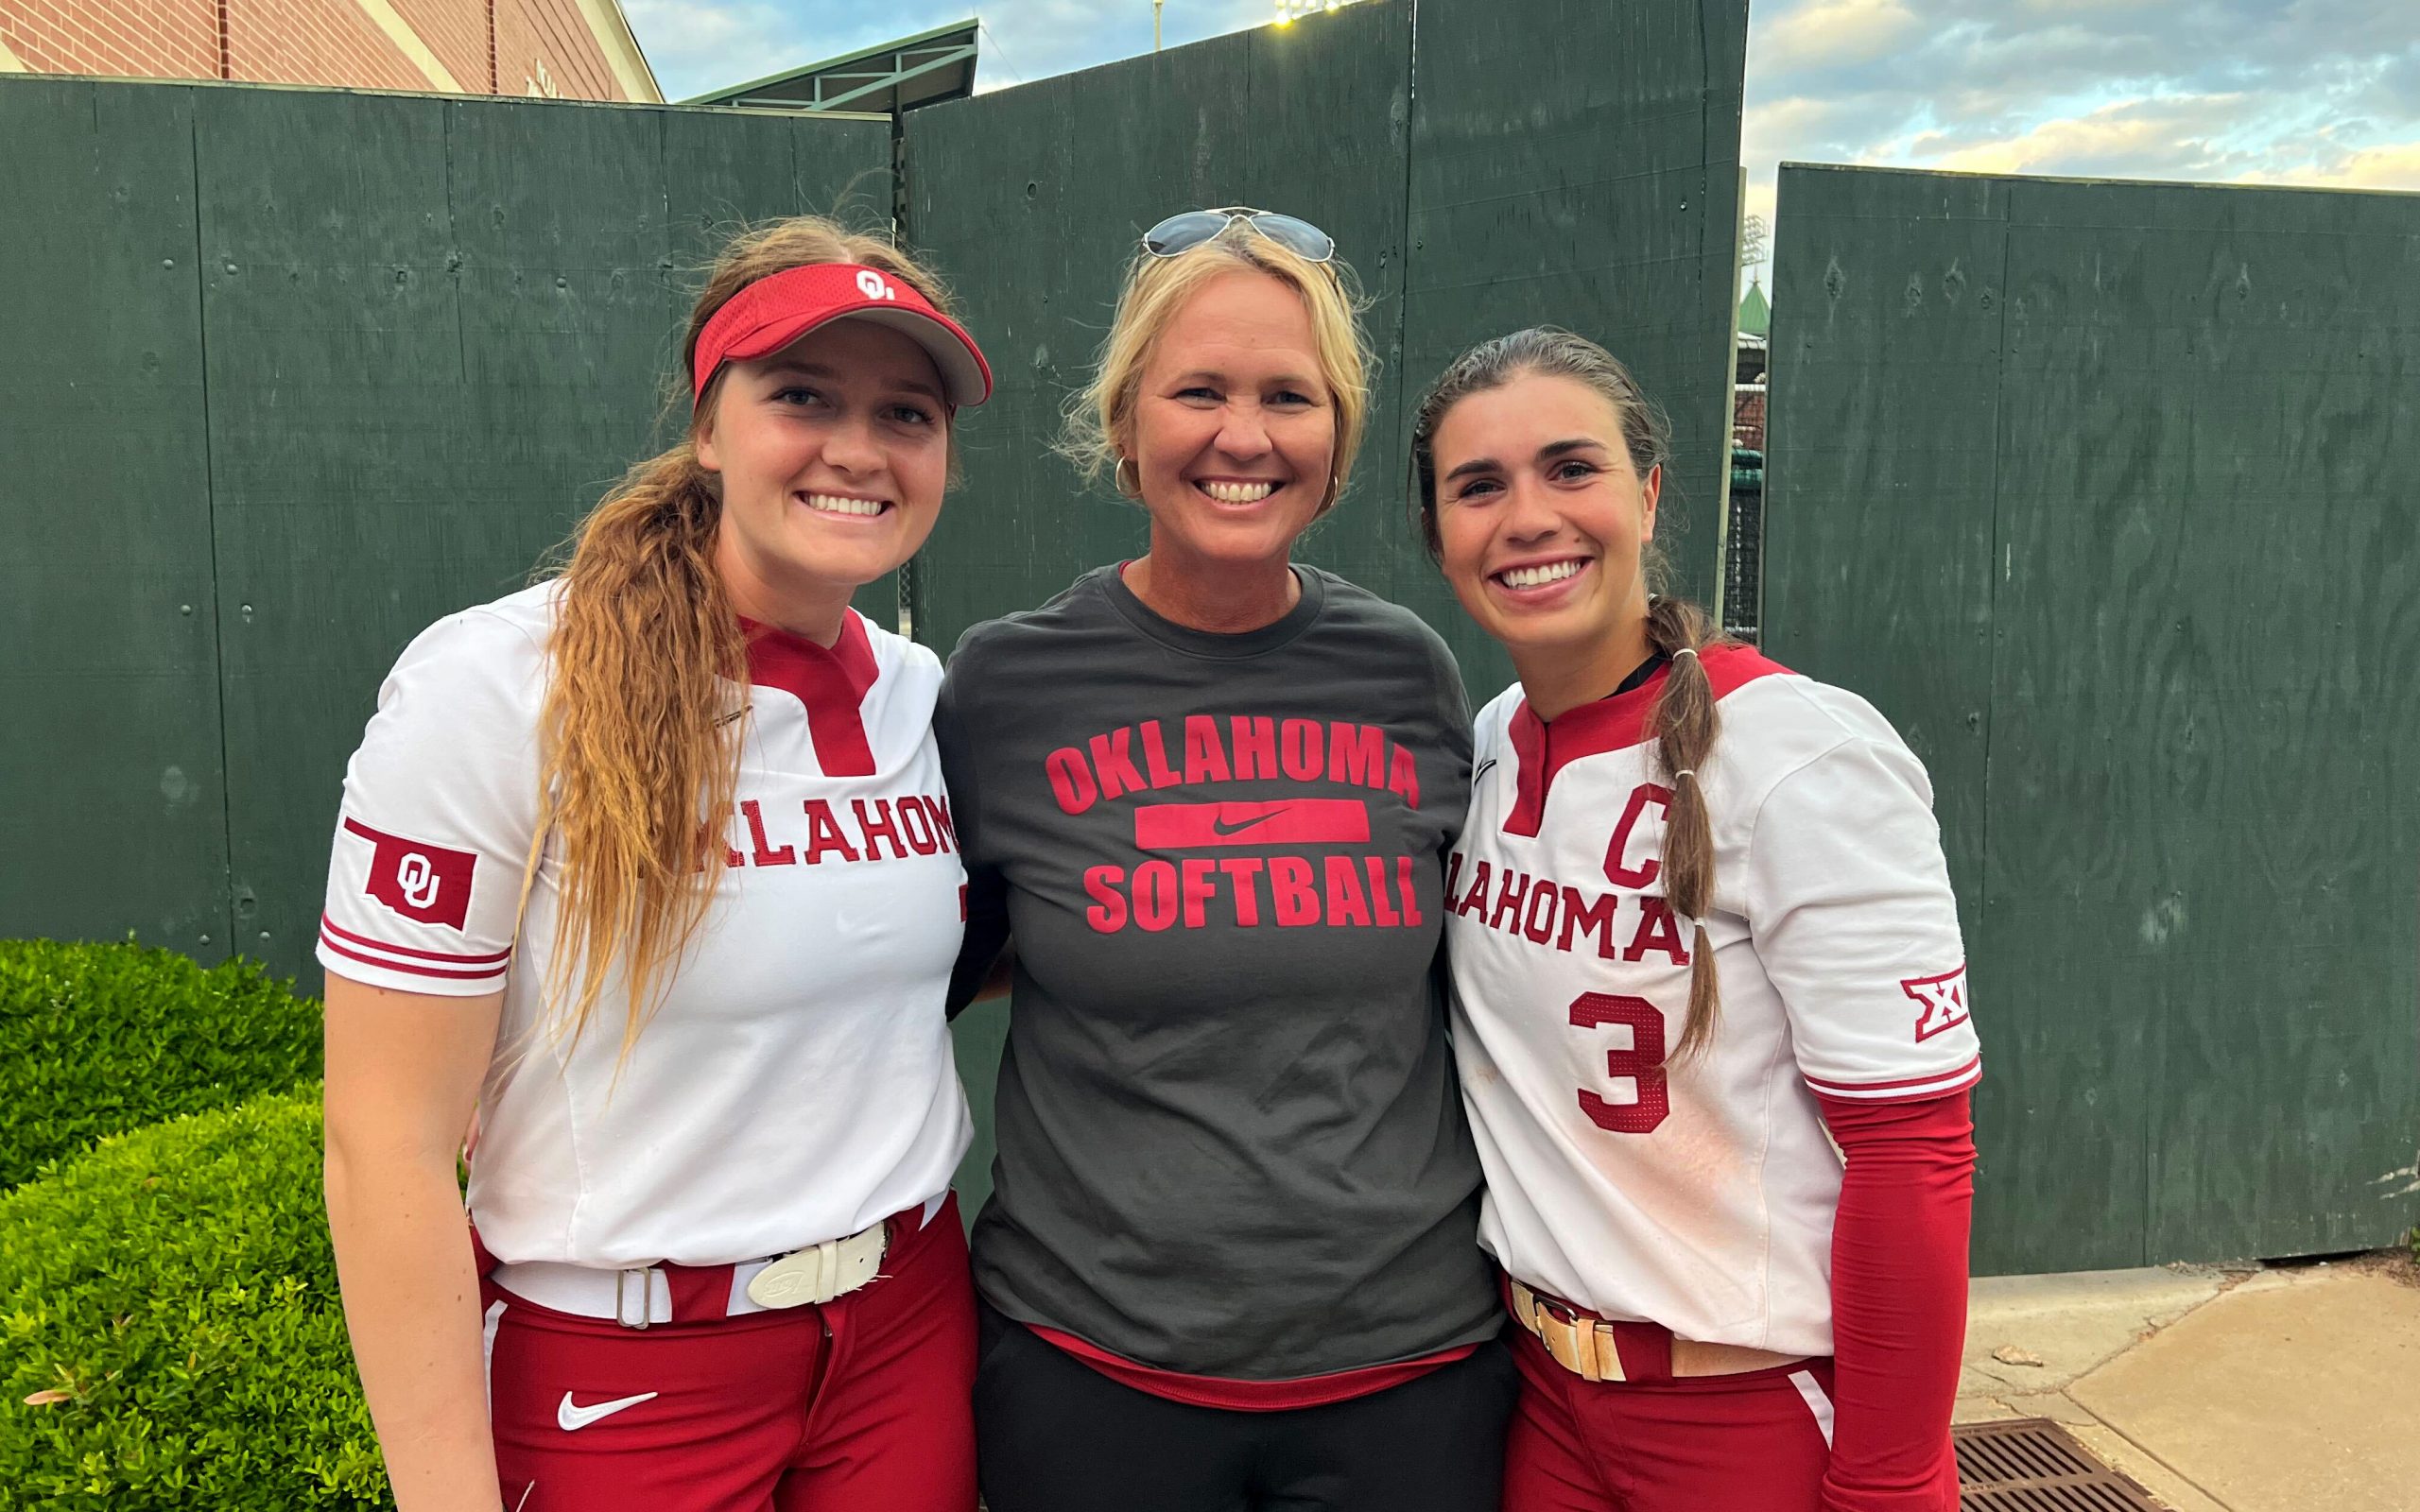 Jocey Erickson (left), Coach Hobson (center) and Grace Lyons (right) reunited at Getterman Stadium in Waco, Texas for a game against Baylor. (Photo courtesy of David Erickson, Jocey’s father)